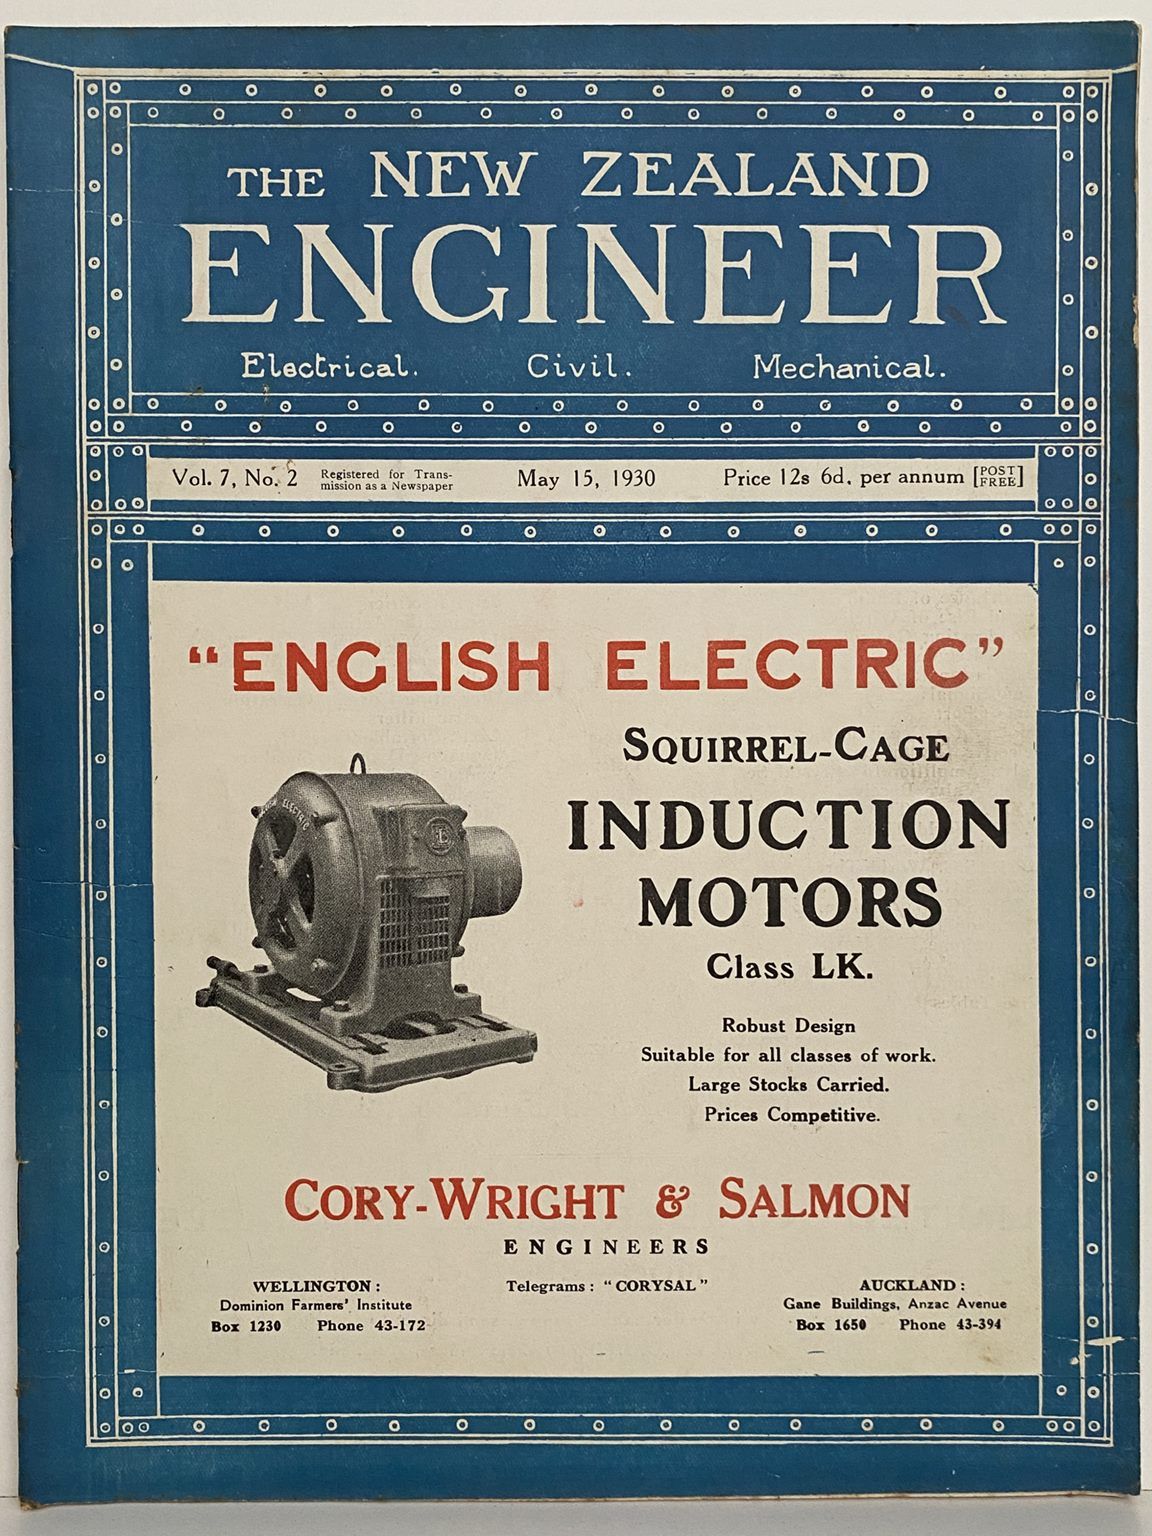 OLD MAGAZINE: The New Zealand Engineer Vol. 7, No. 2 - 15 May 1930